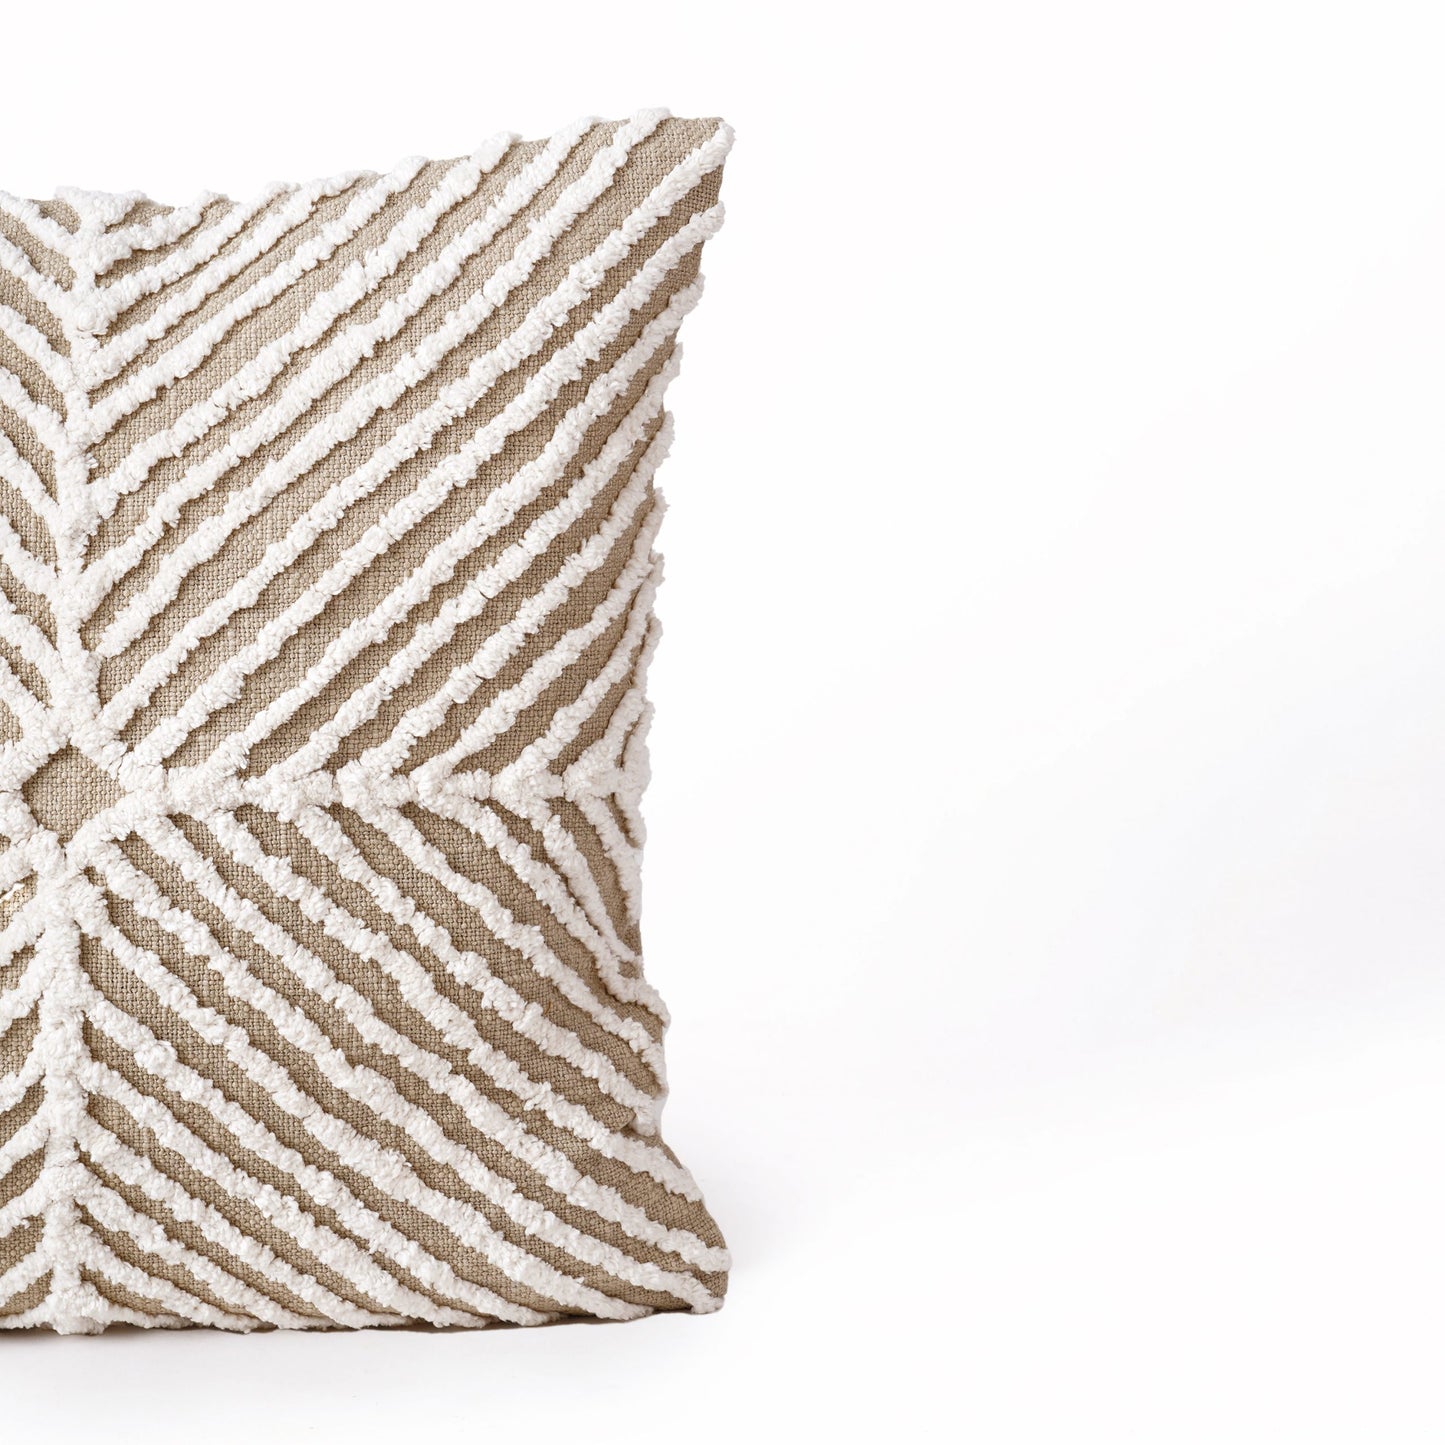 Tufted off white &amp; Beige Throw Pillow Cover, 18X18 inches - Zulu Collection